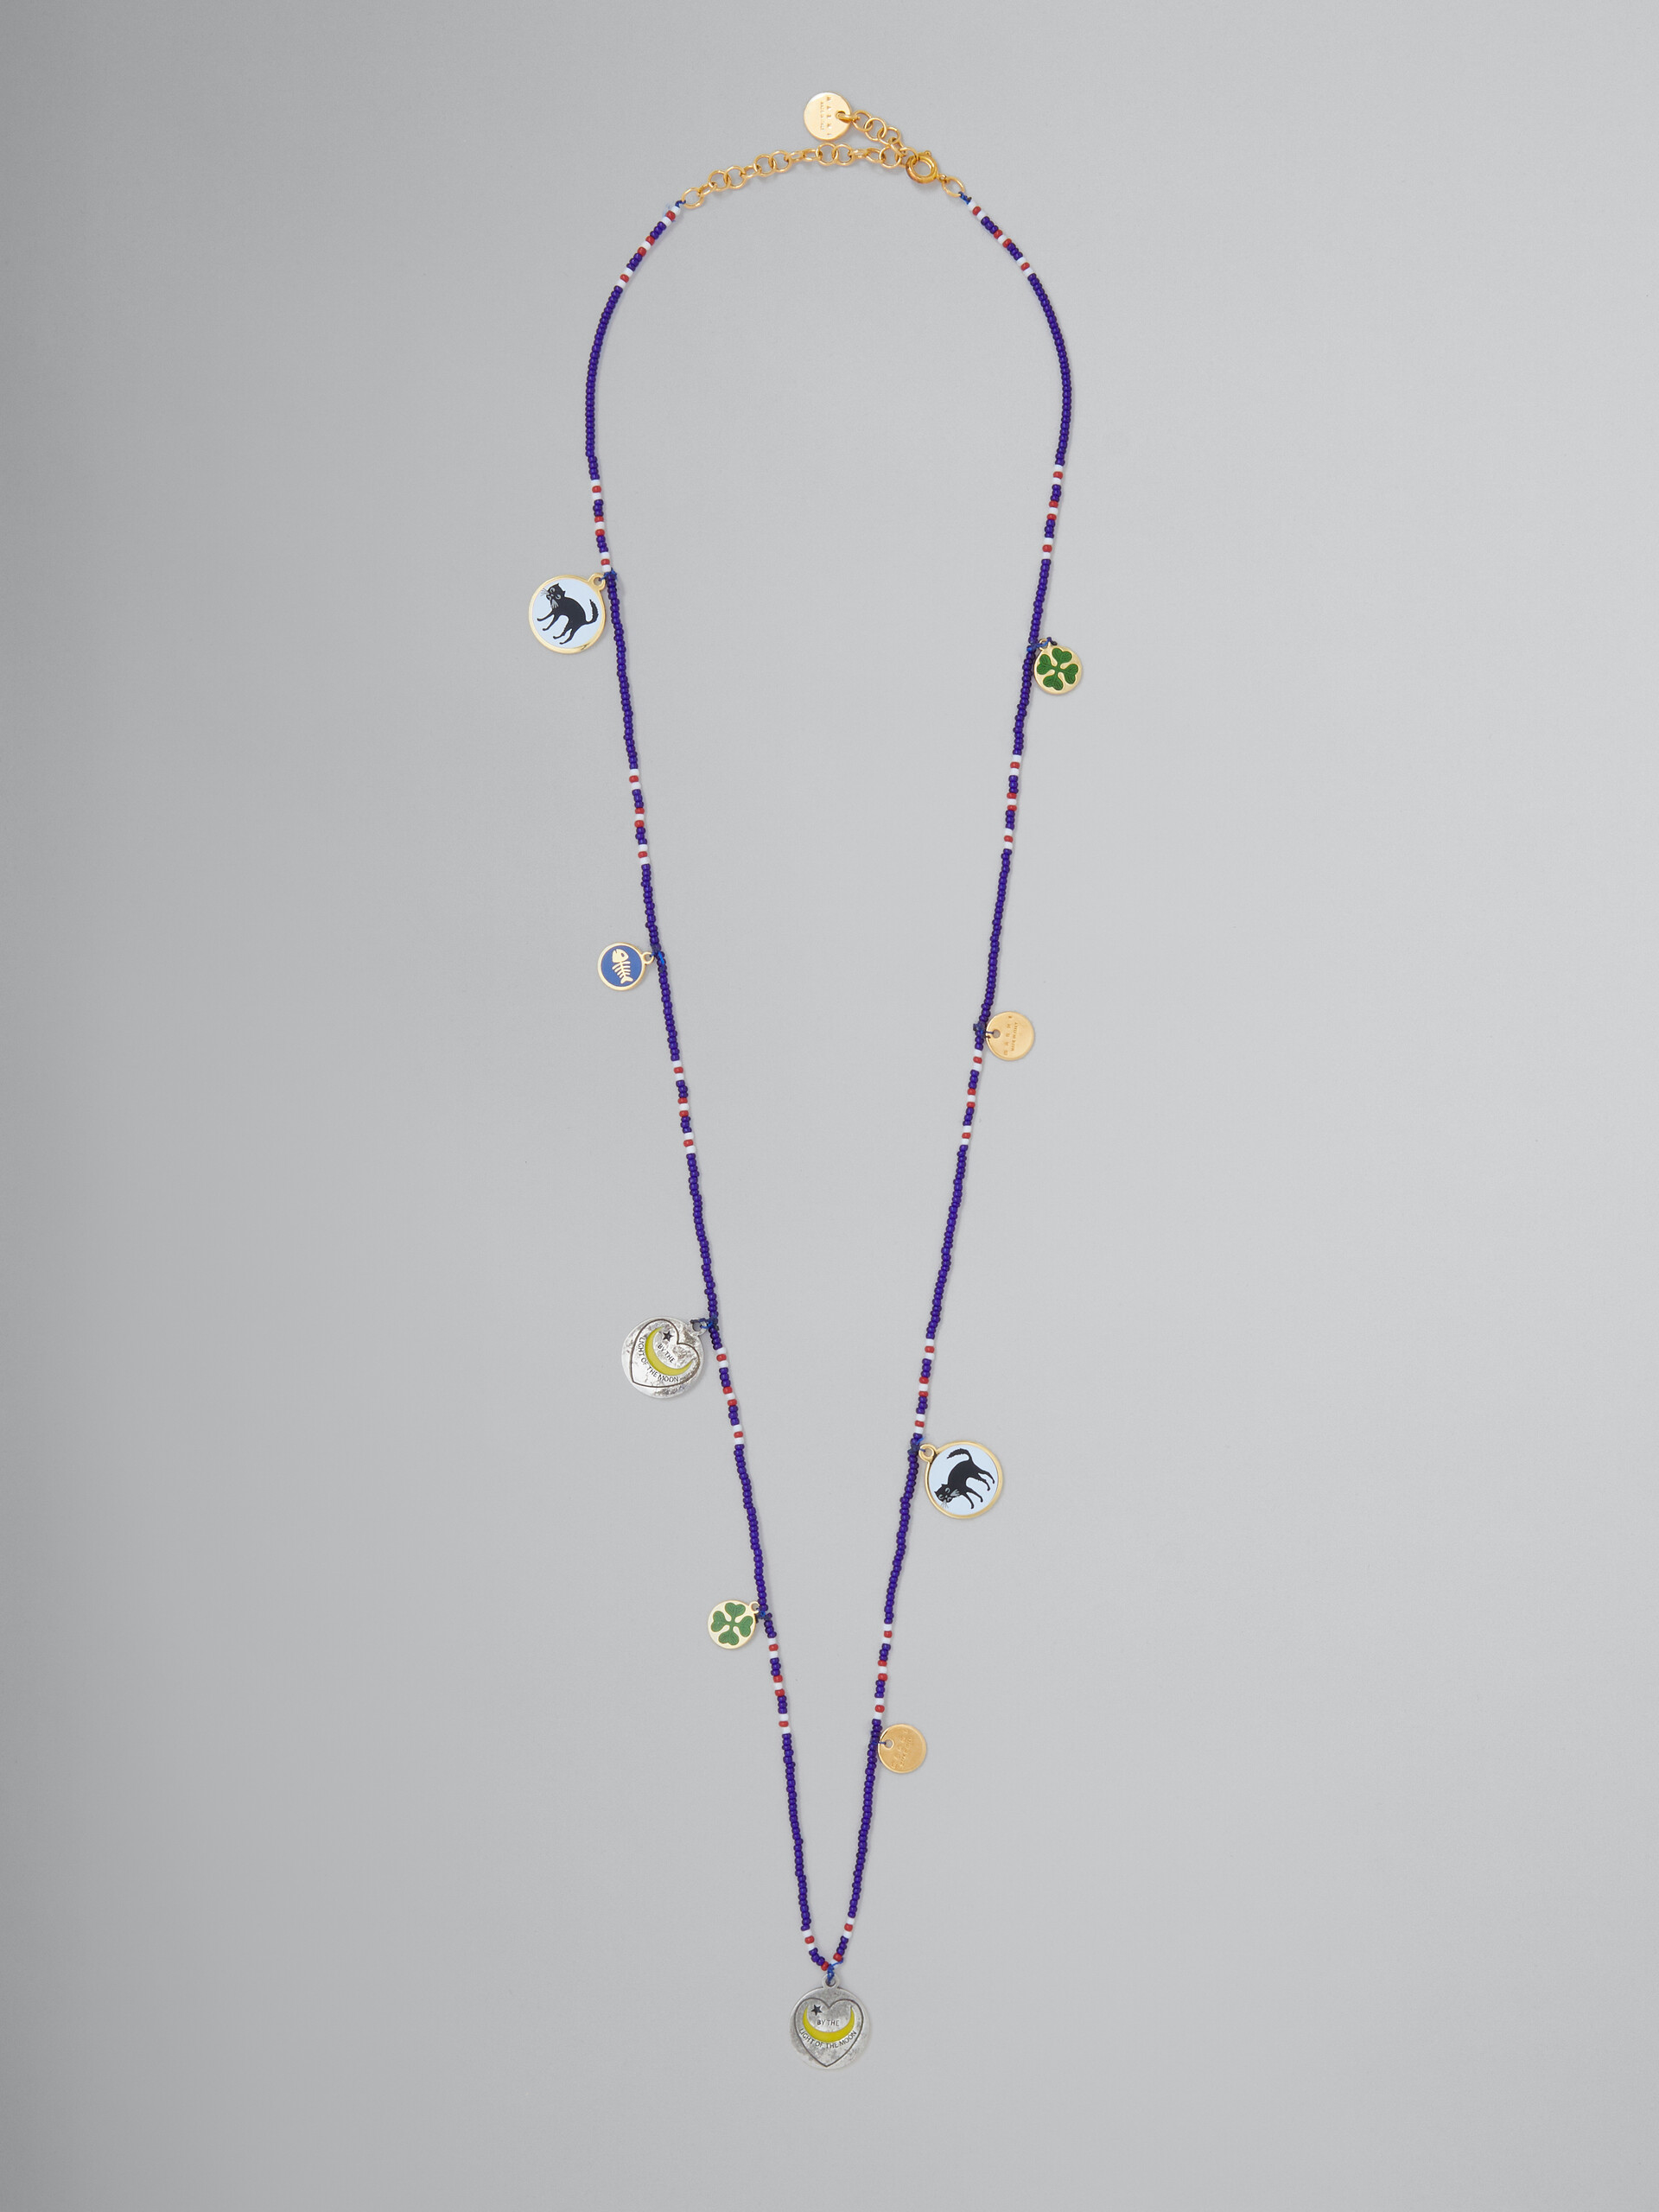 Micro-bead necklace with disc charms - Necklaces - Image 1